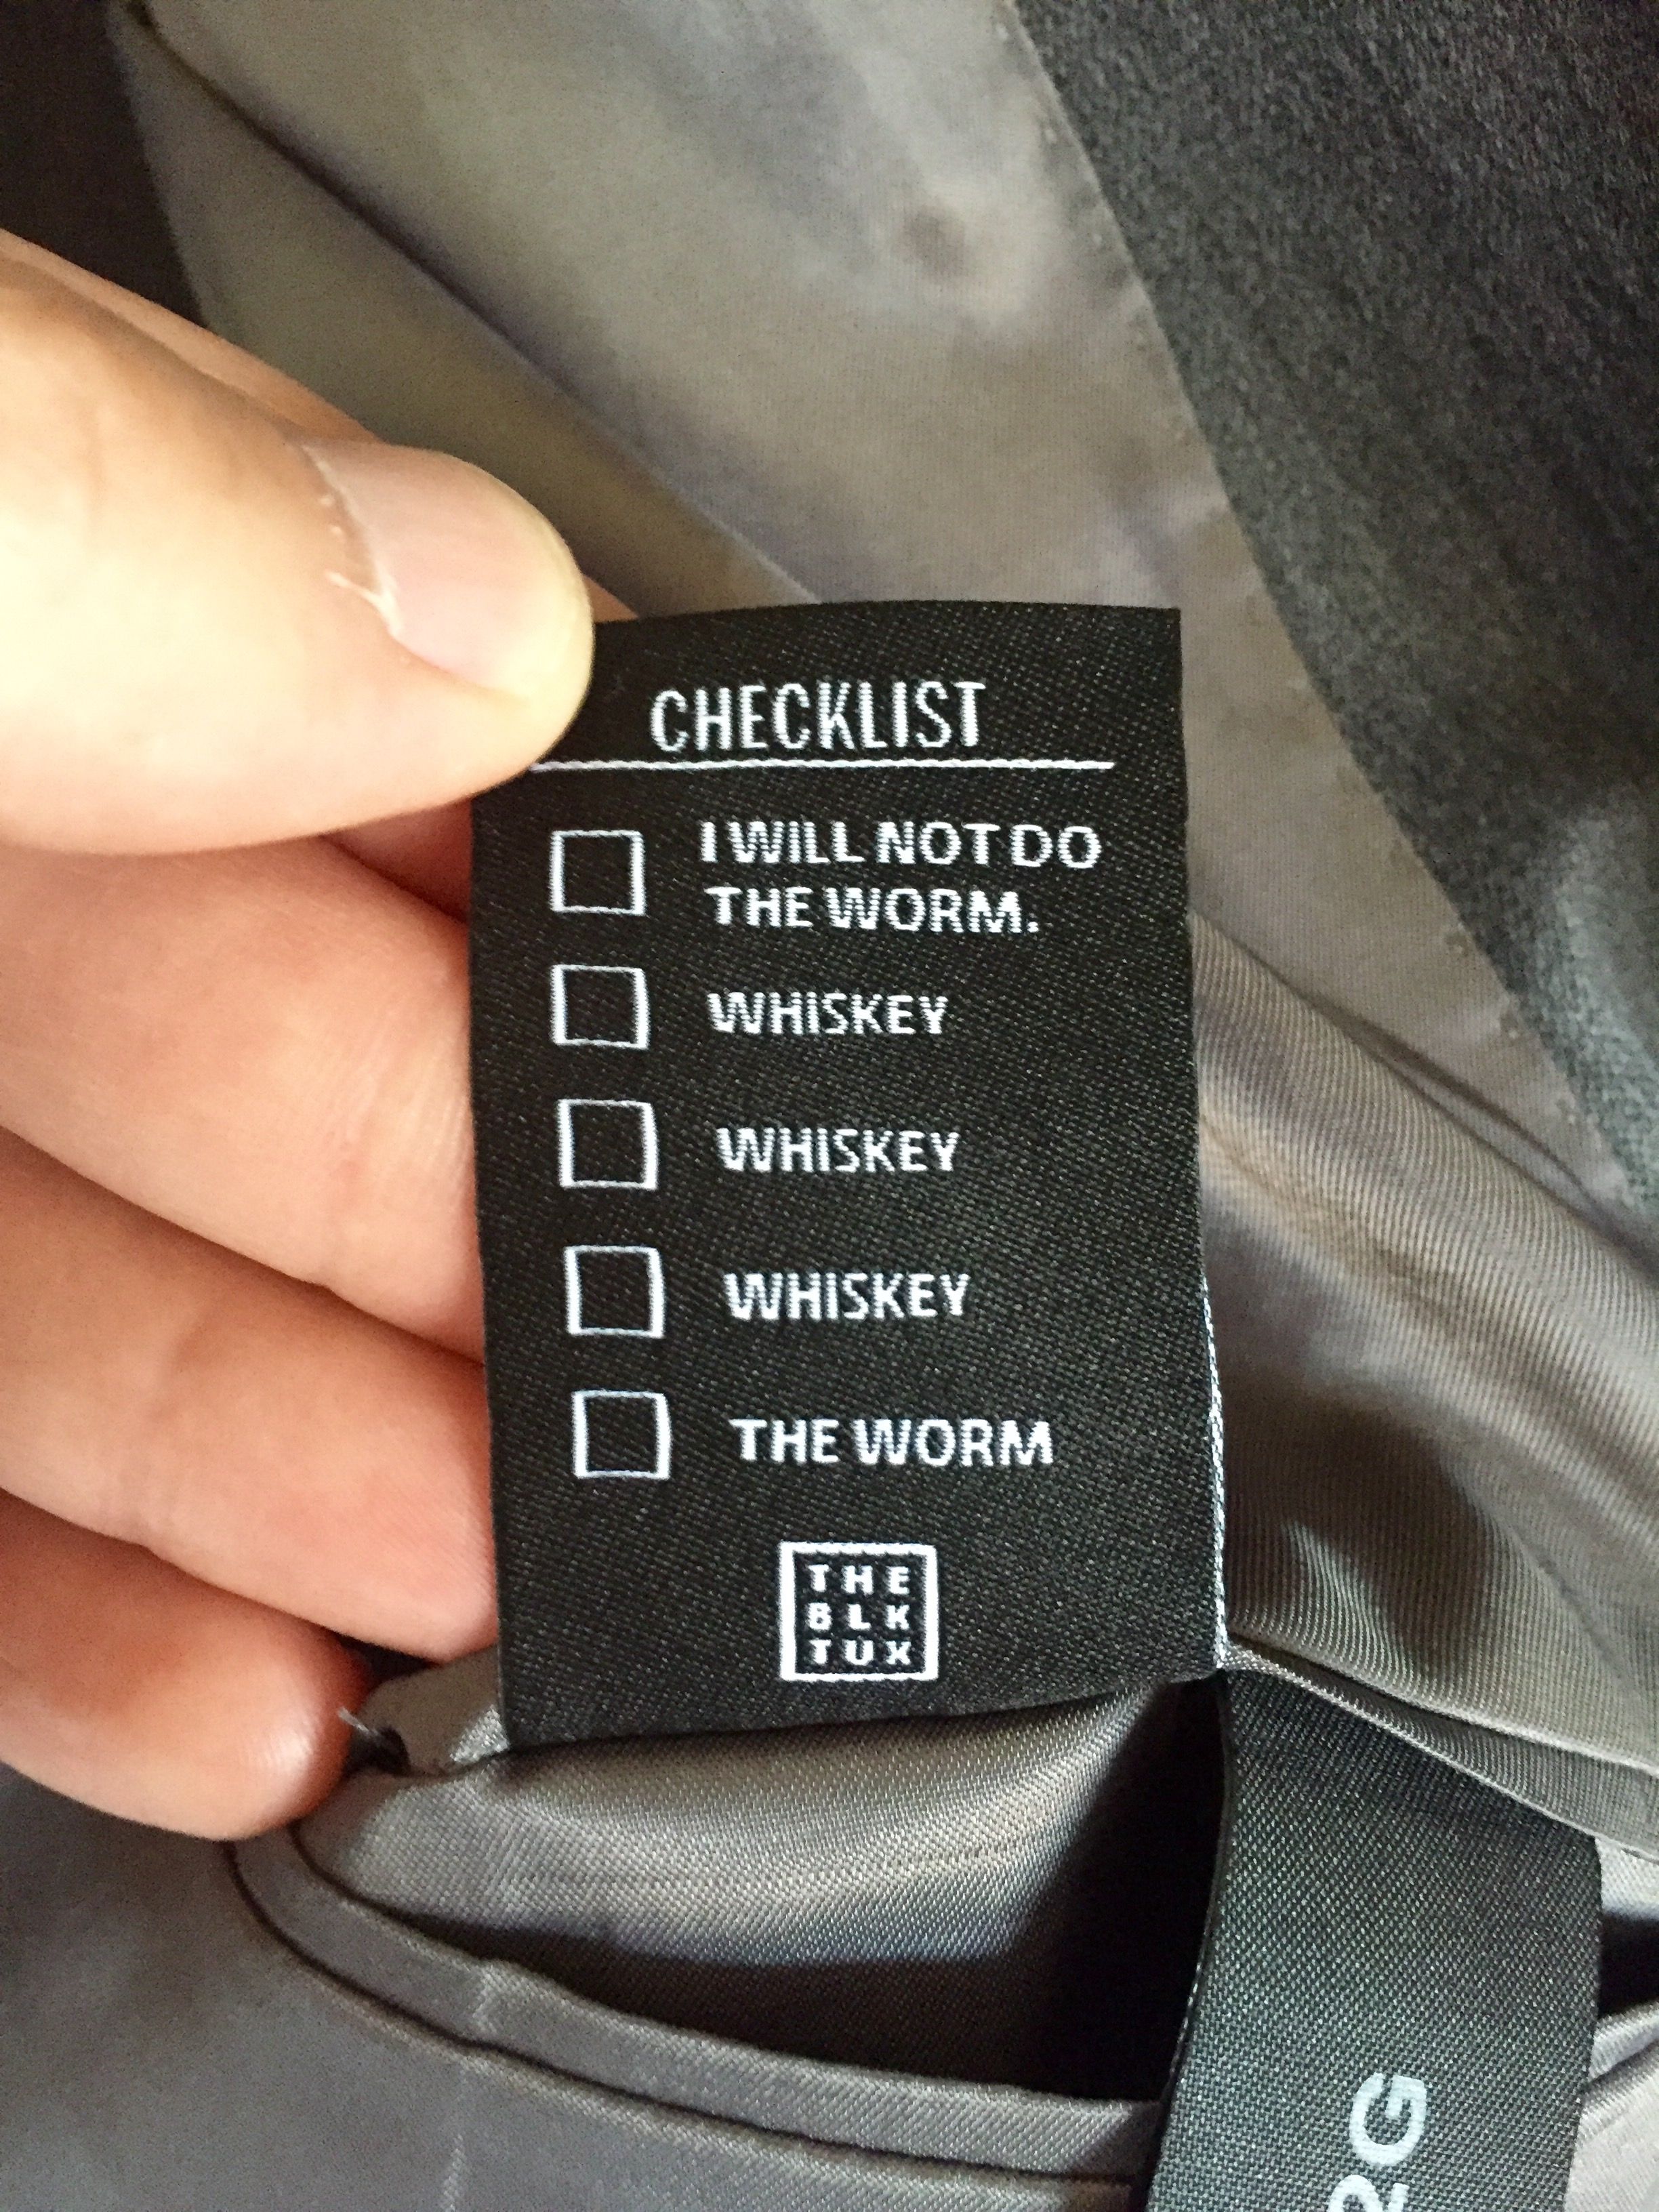 My rented tuxedo had an extra tag on the inside jacket pocket to help me get through the wedding.